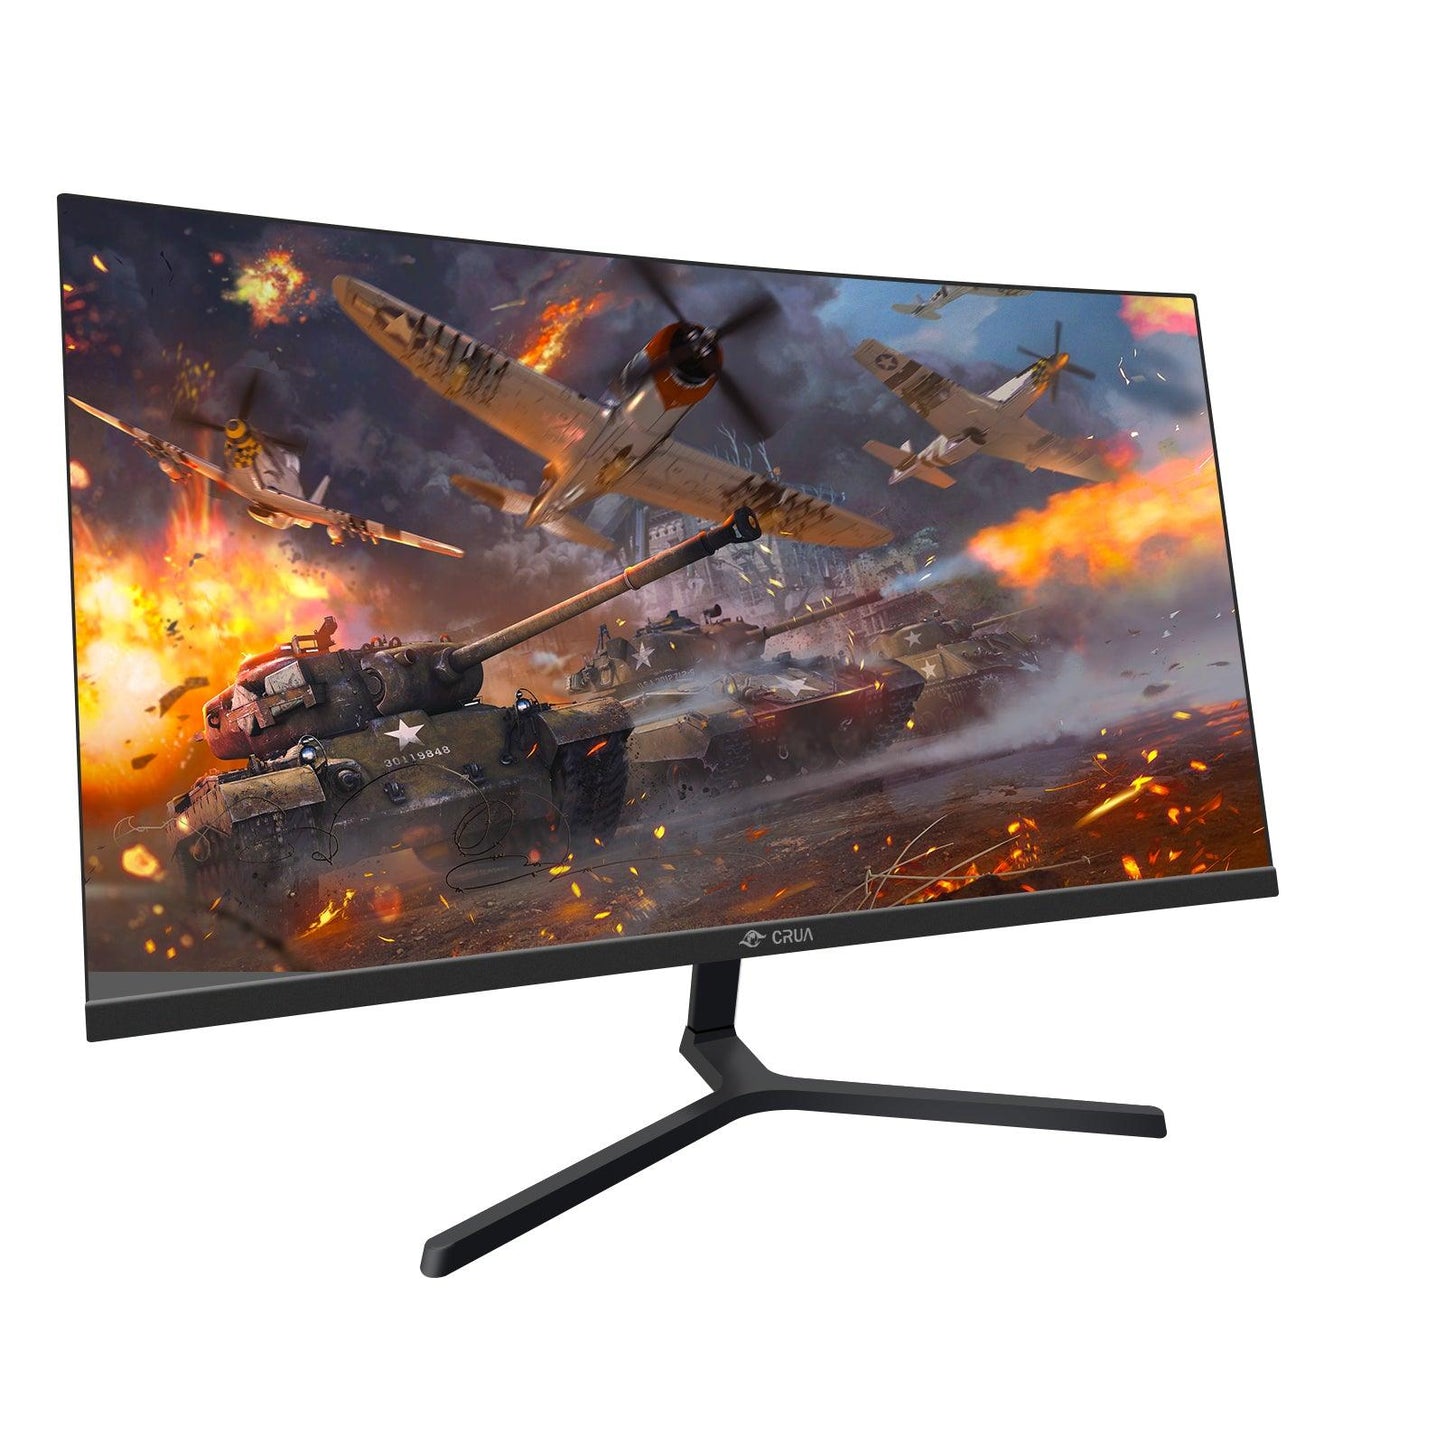 MONITOR TEROS 27″ FLAT 144HZ 1MS FHD – PC System Store